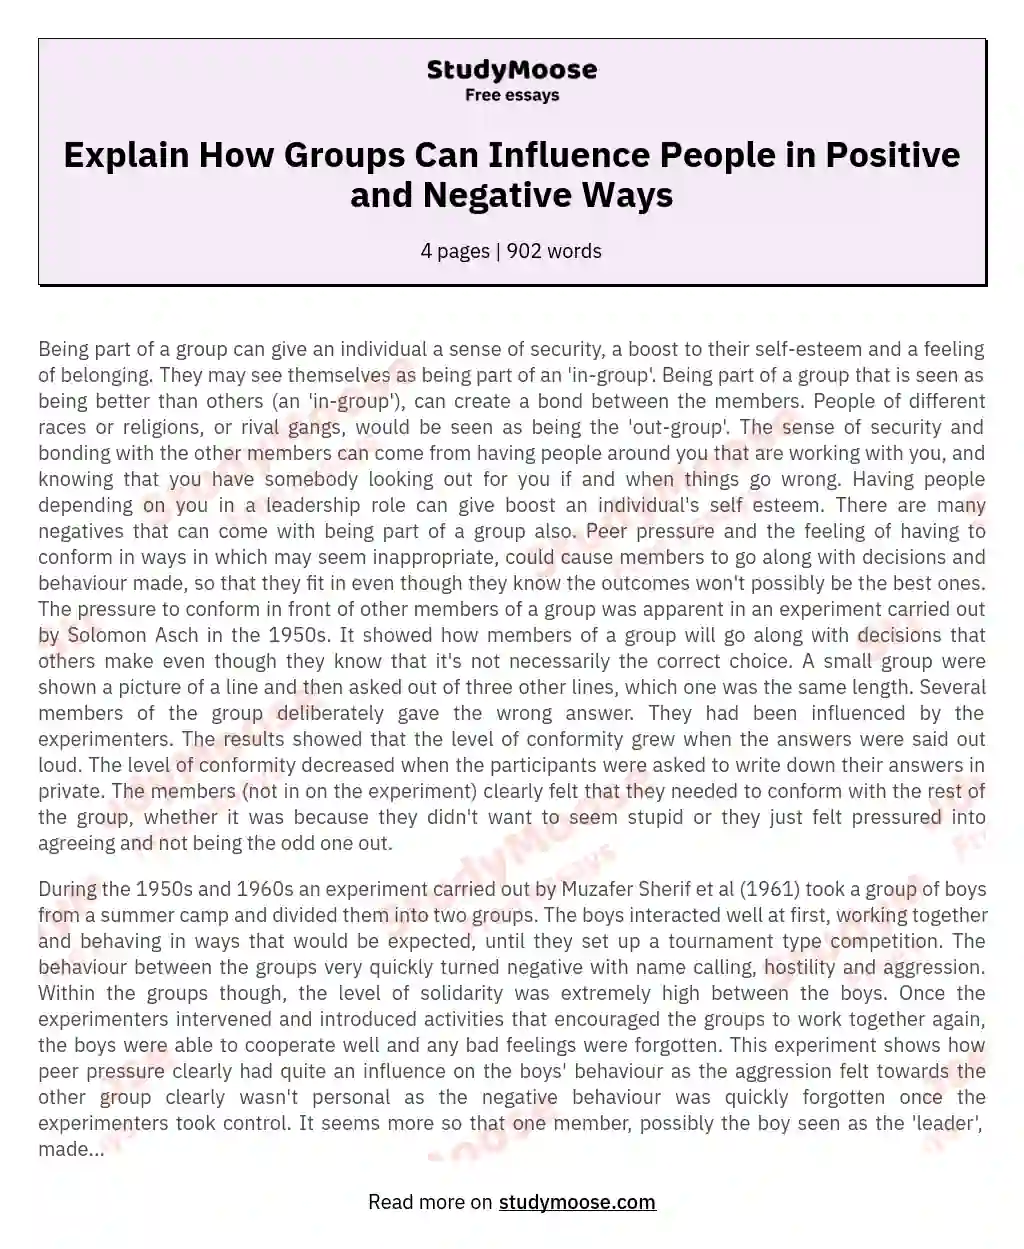 Explain How Groups Can Influence People in Positive and Negative Ways essay